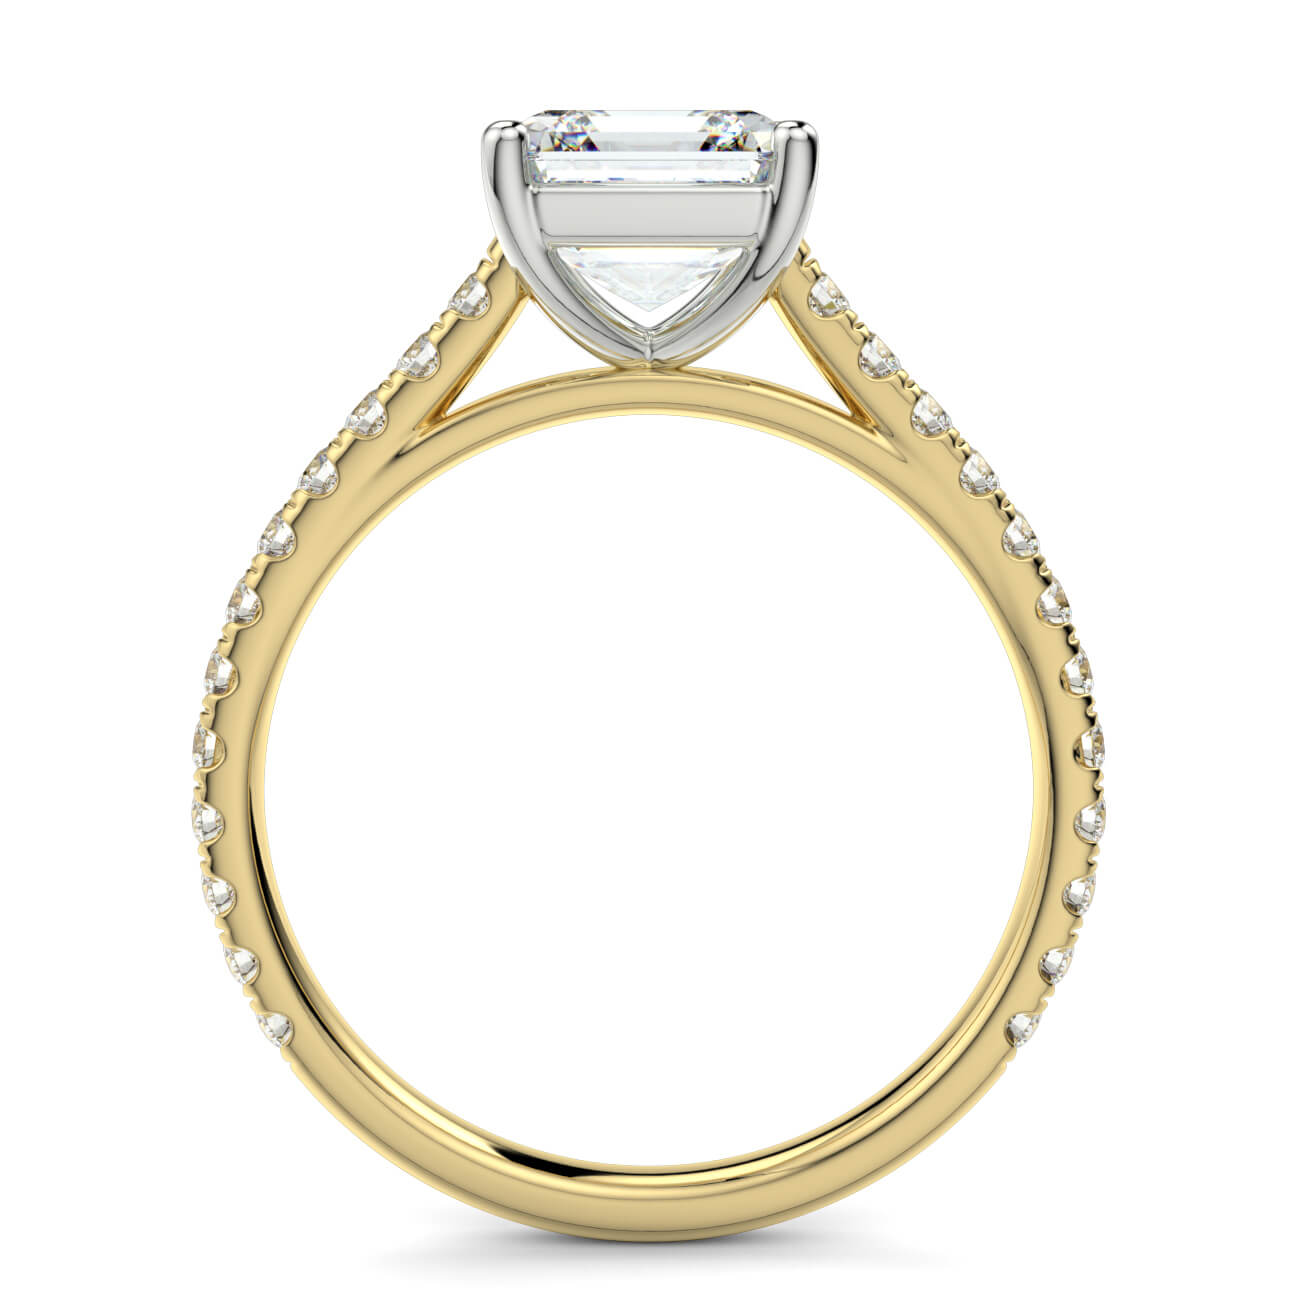 Asscher Cut diamond cathedral engagement ring in yellow gold and white gold – Australian Diamond Network